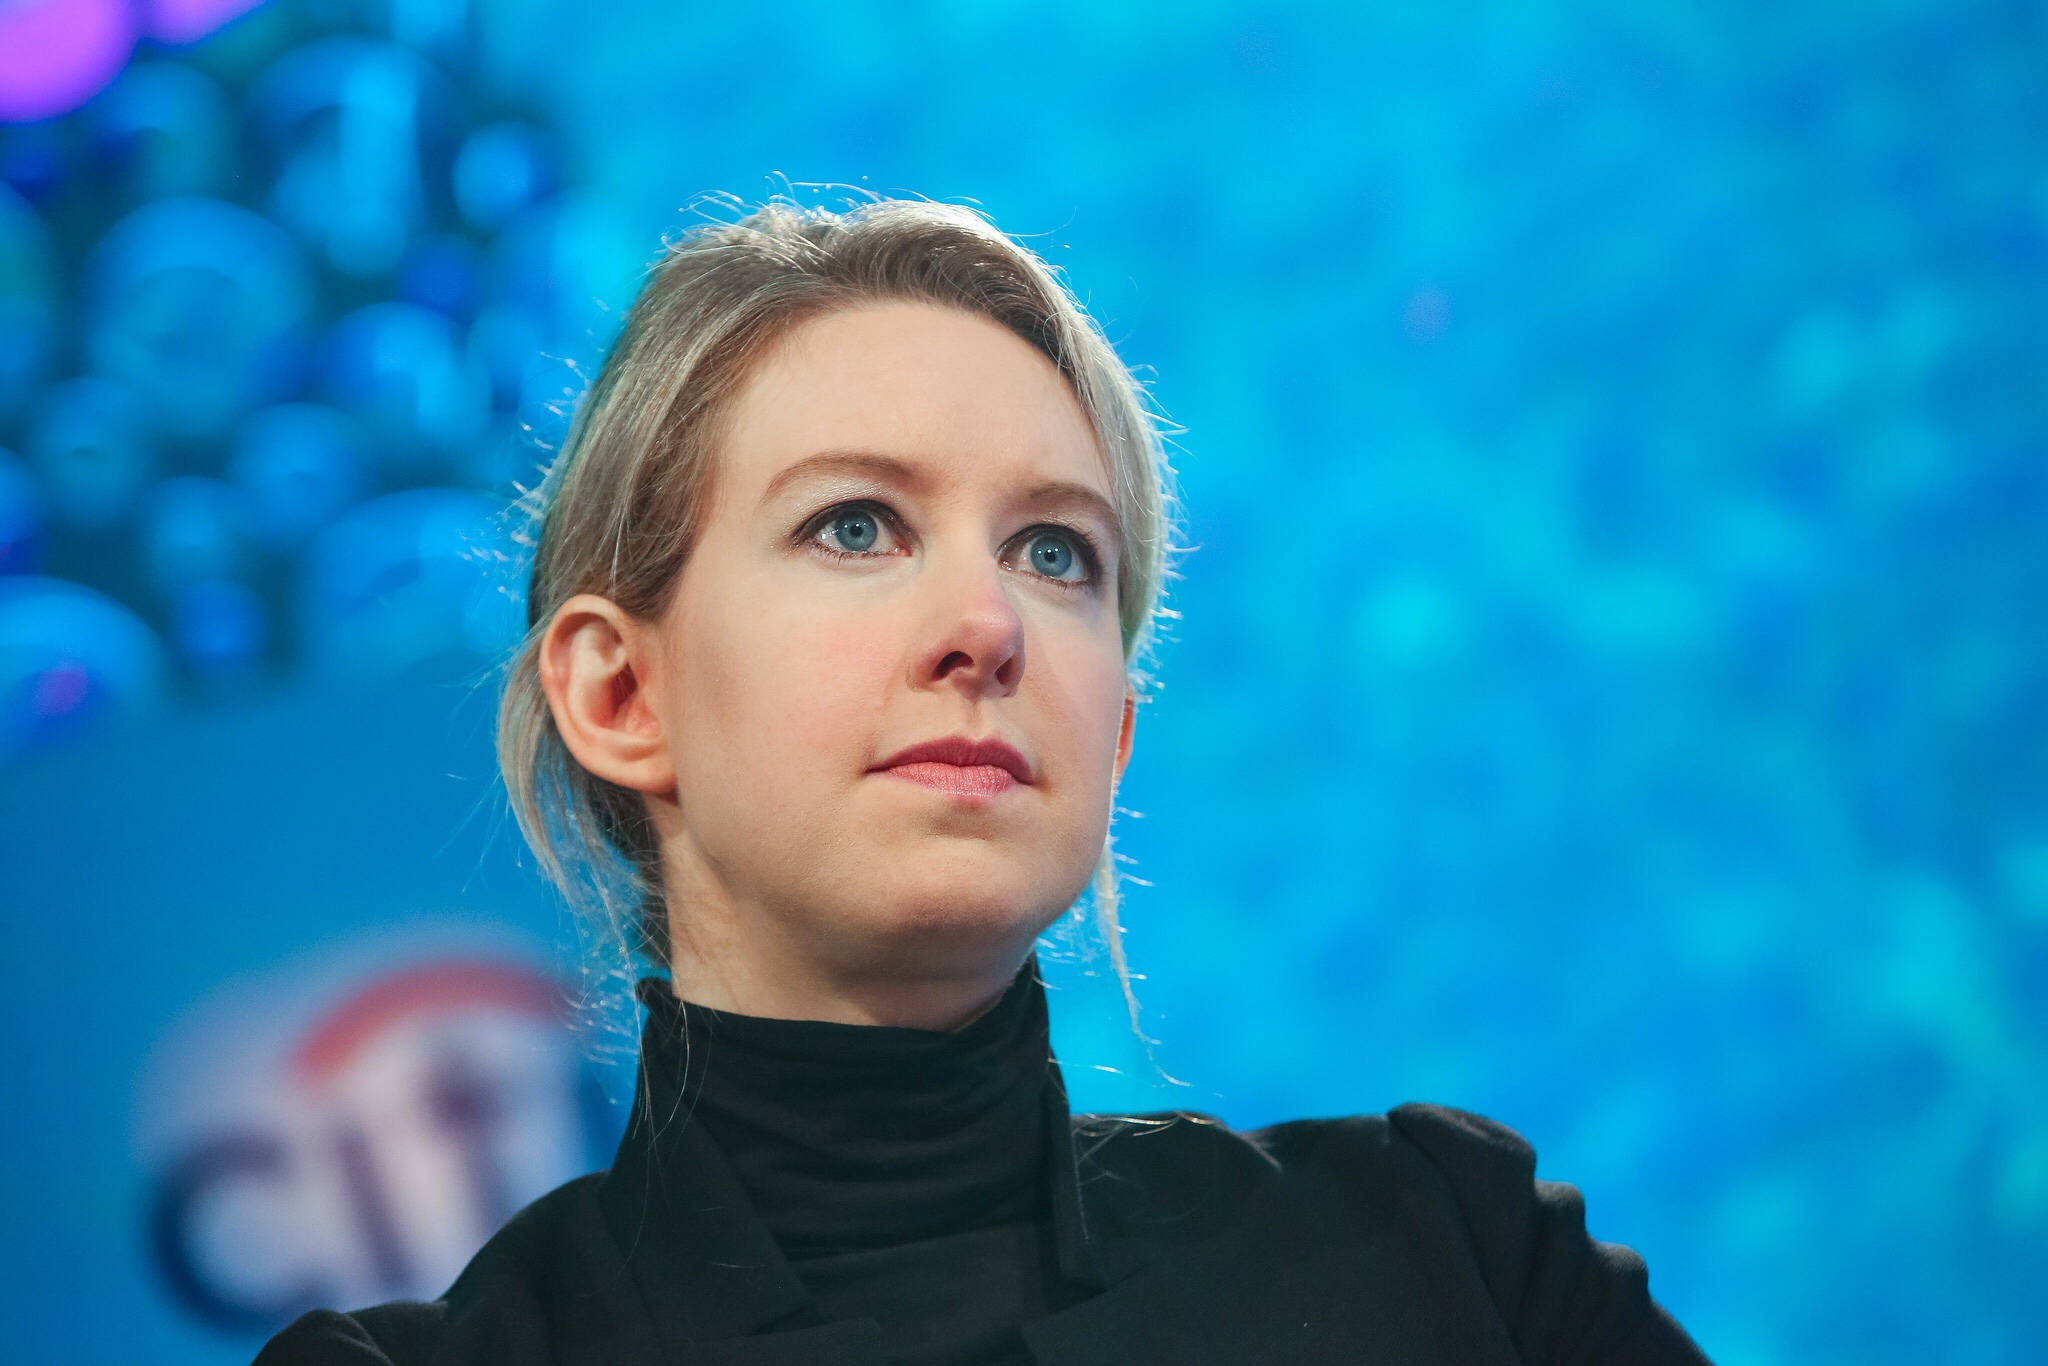 SEC has charged Theranos and CEO Elizabeth Holmes with ‘massive fraud’